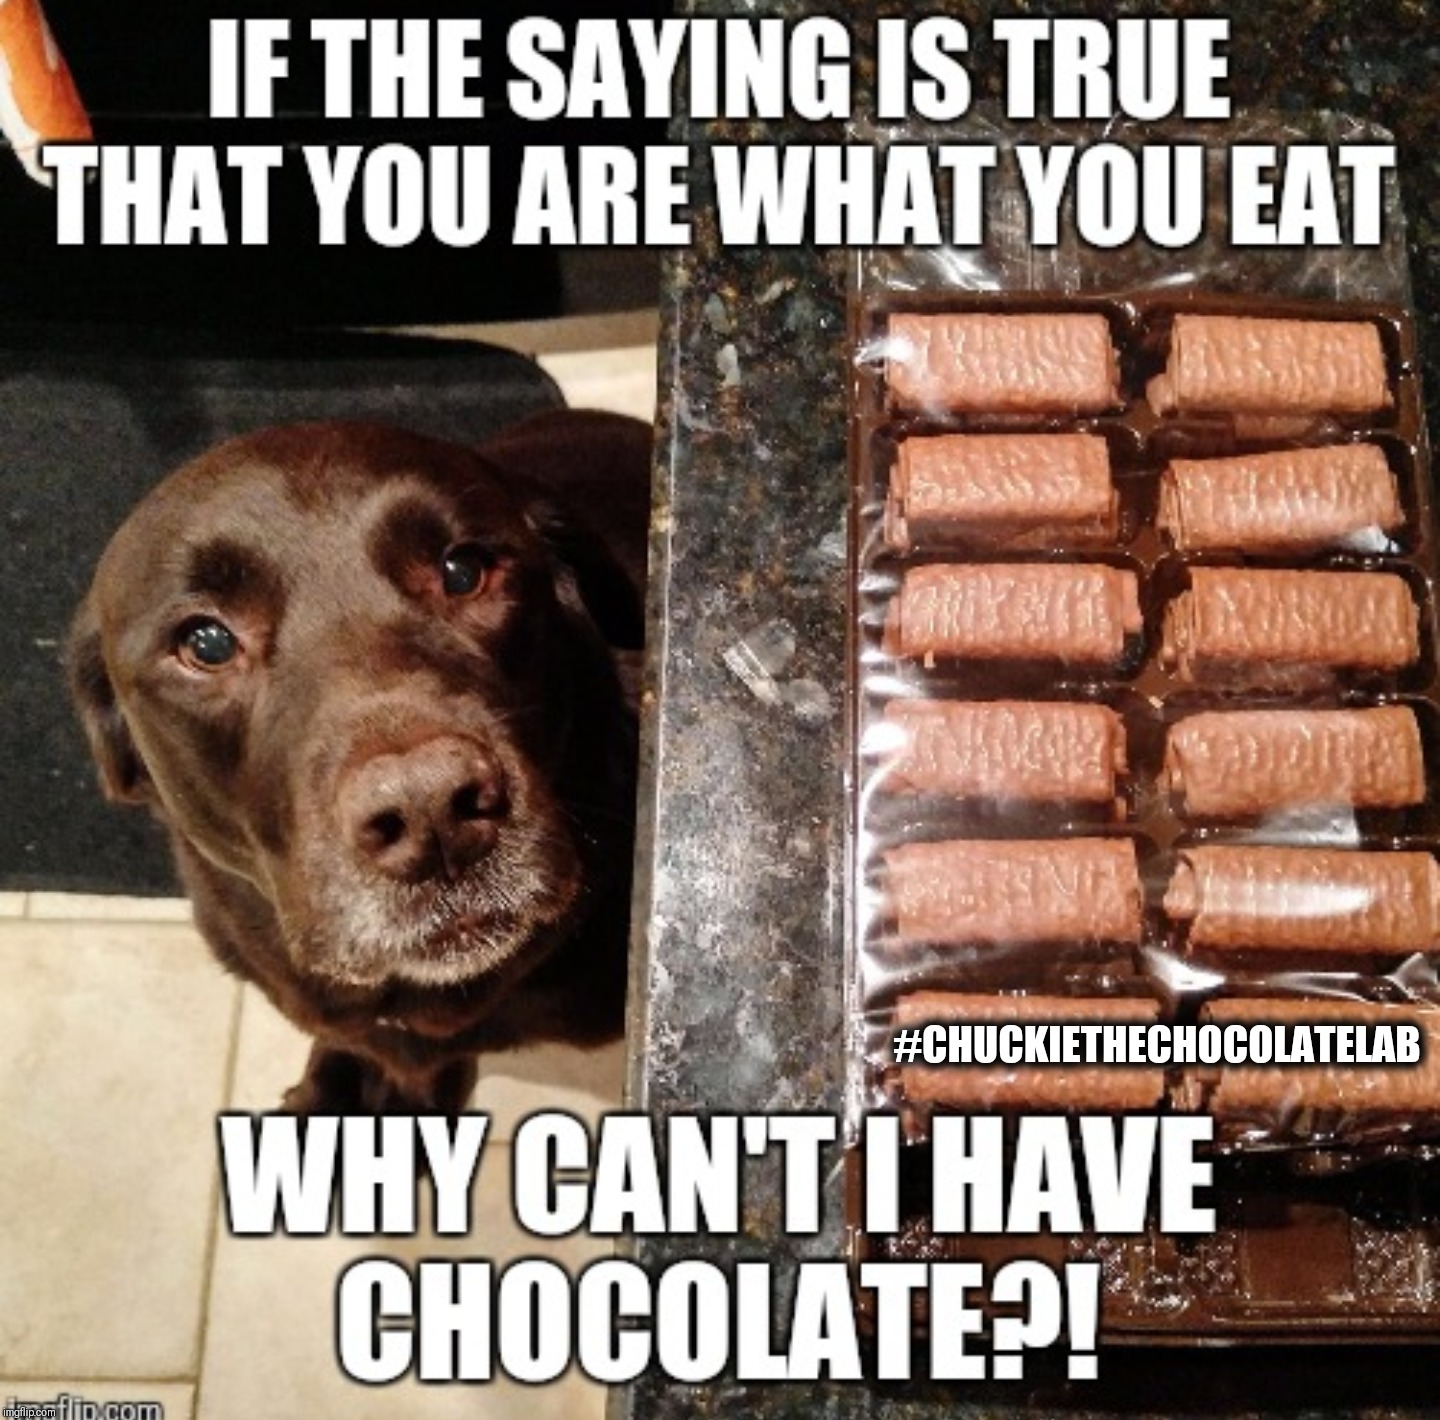 Why can't I have chocolate?  |  #CHUCKIETHECHOCOLATELAB | image tagged in chuckie the chocolate lab,chocolate,memes,funny,dogs,cute | made w/ Imgflip meme maker